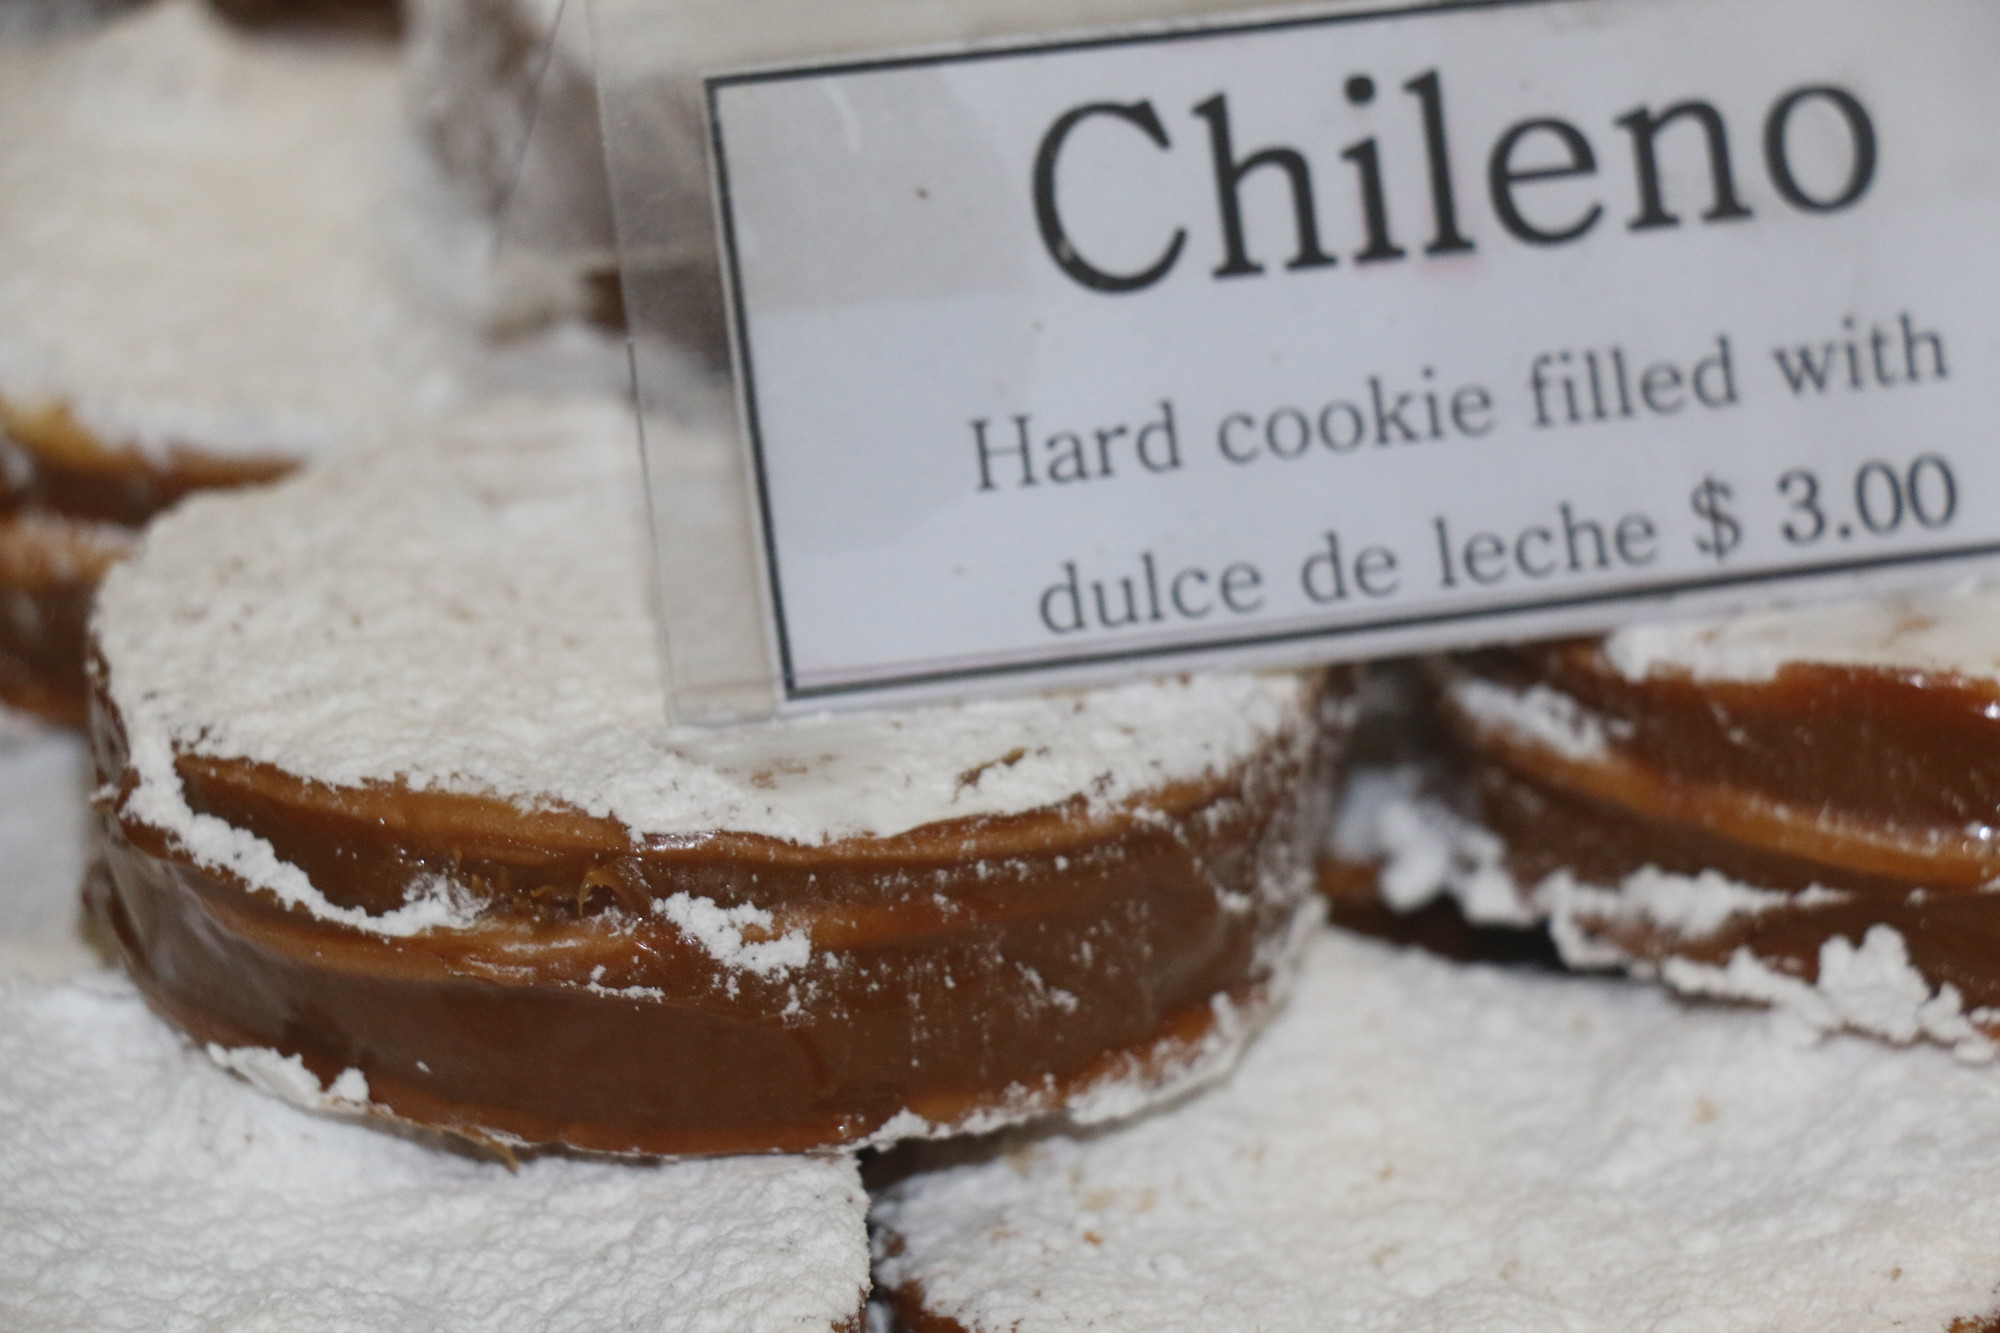 Homemade pastries include the Chileno, filled with the popular Latin American treat dulce de leche.